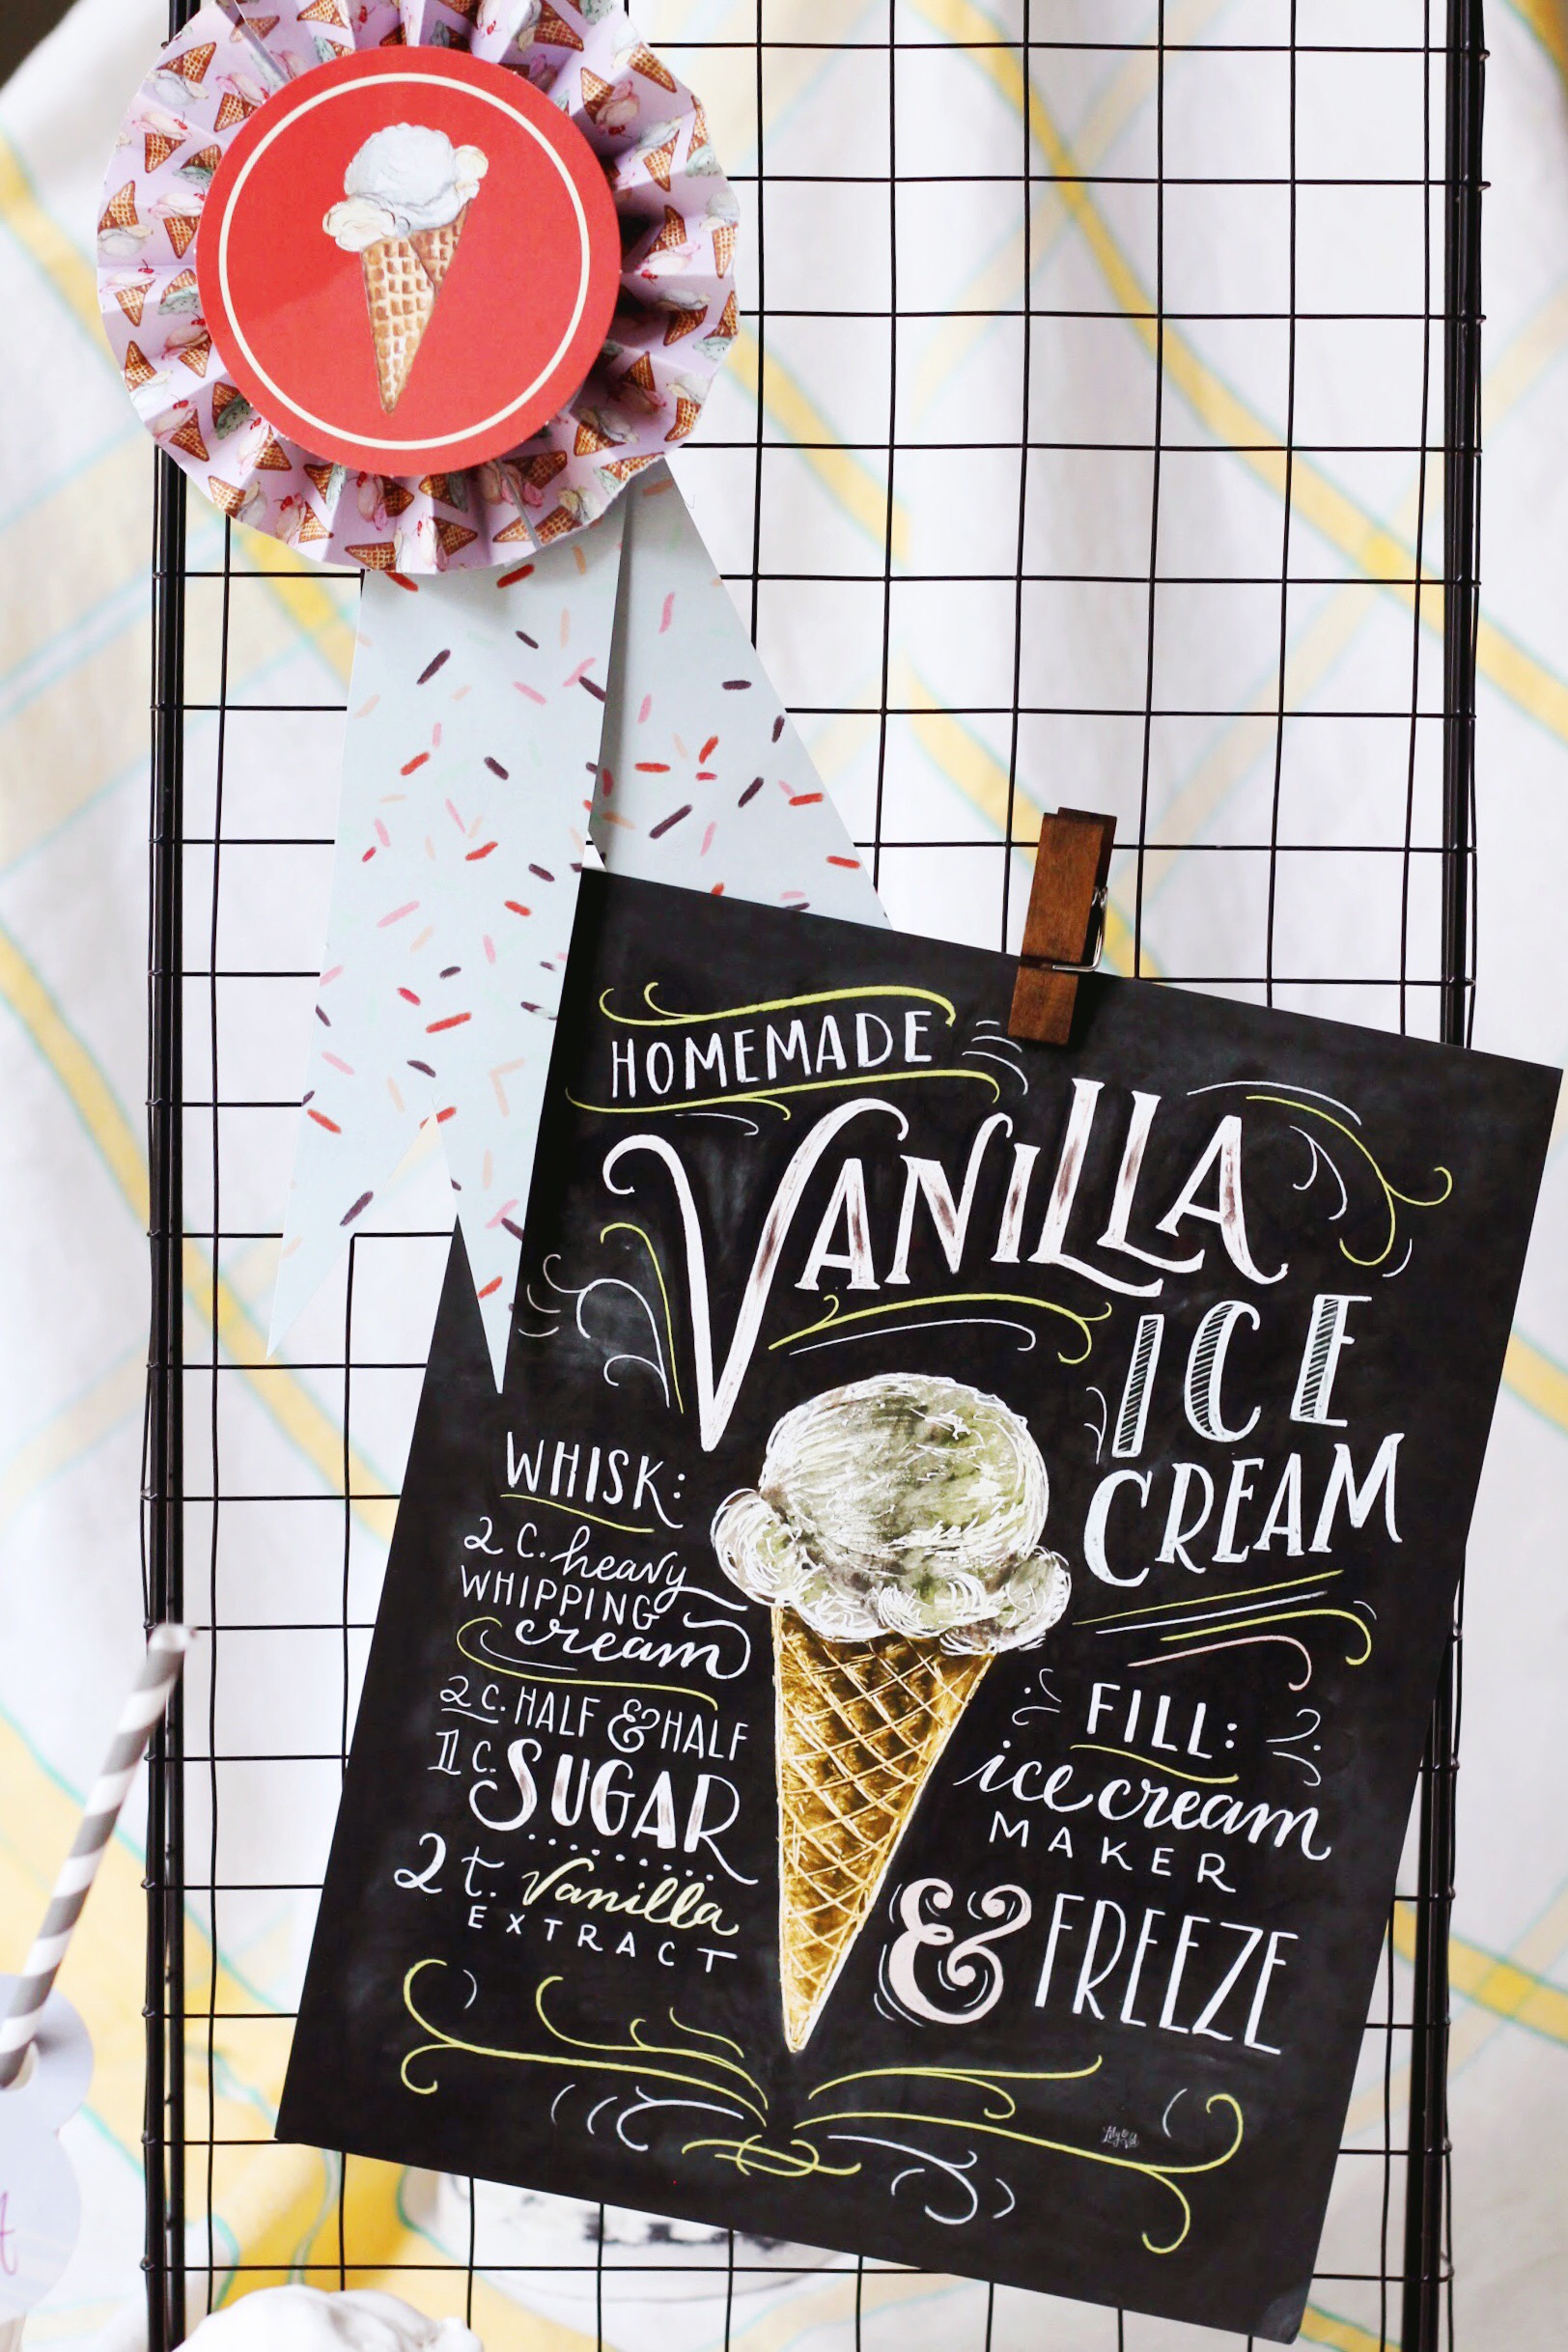 Ice Cream Social Using the Paper Crafting Book